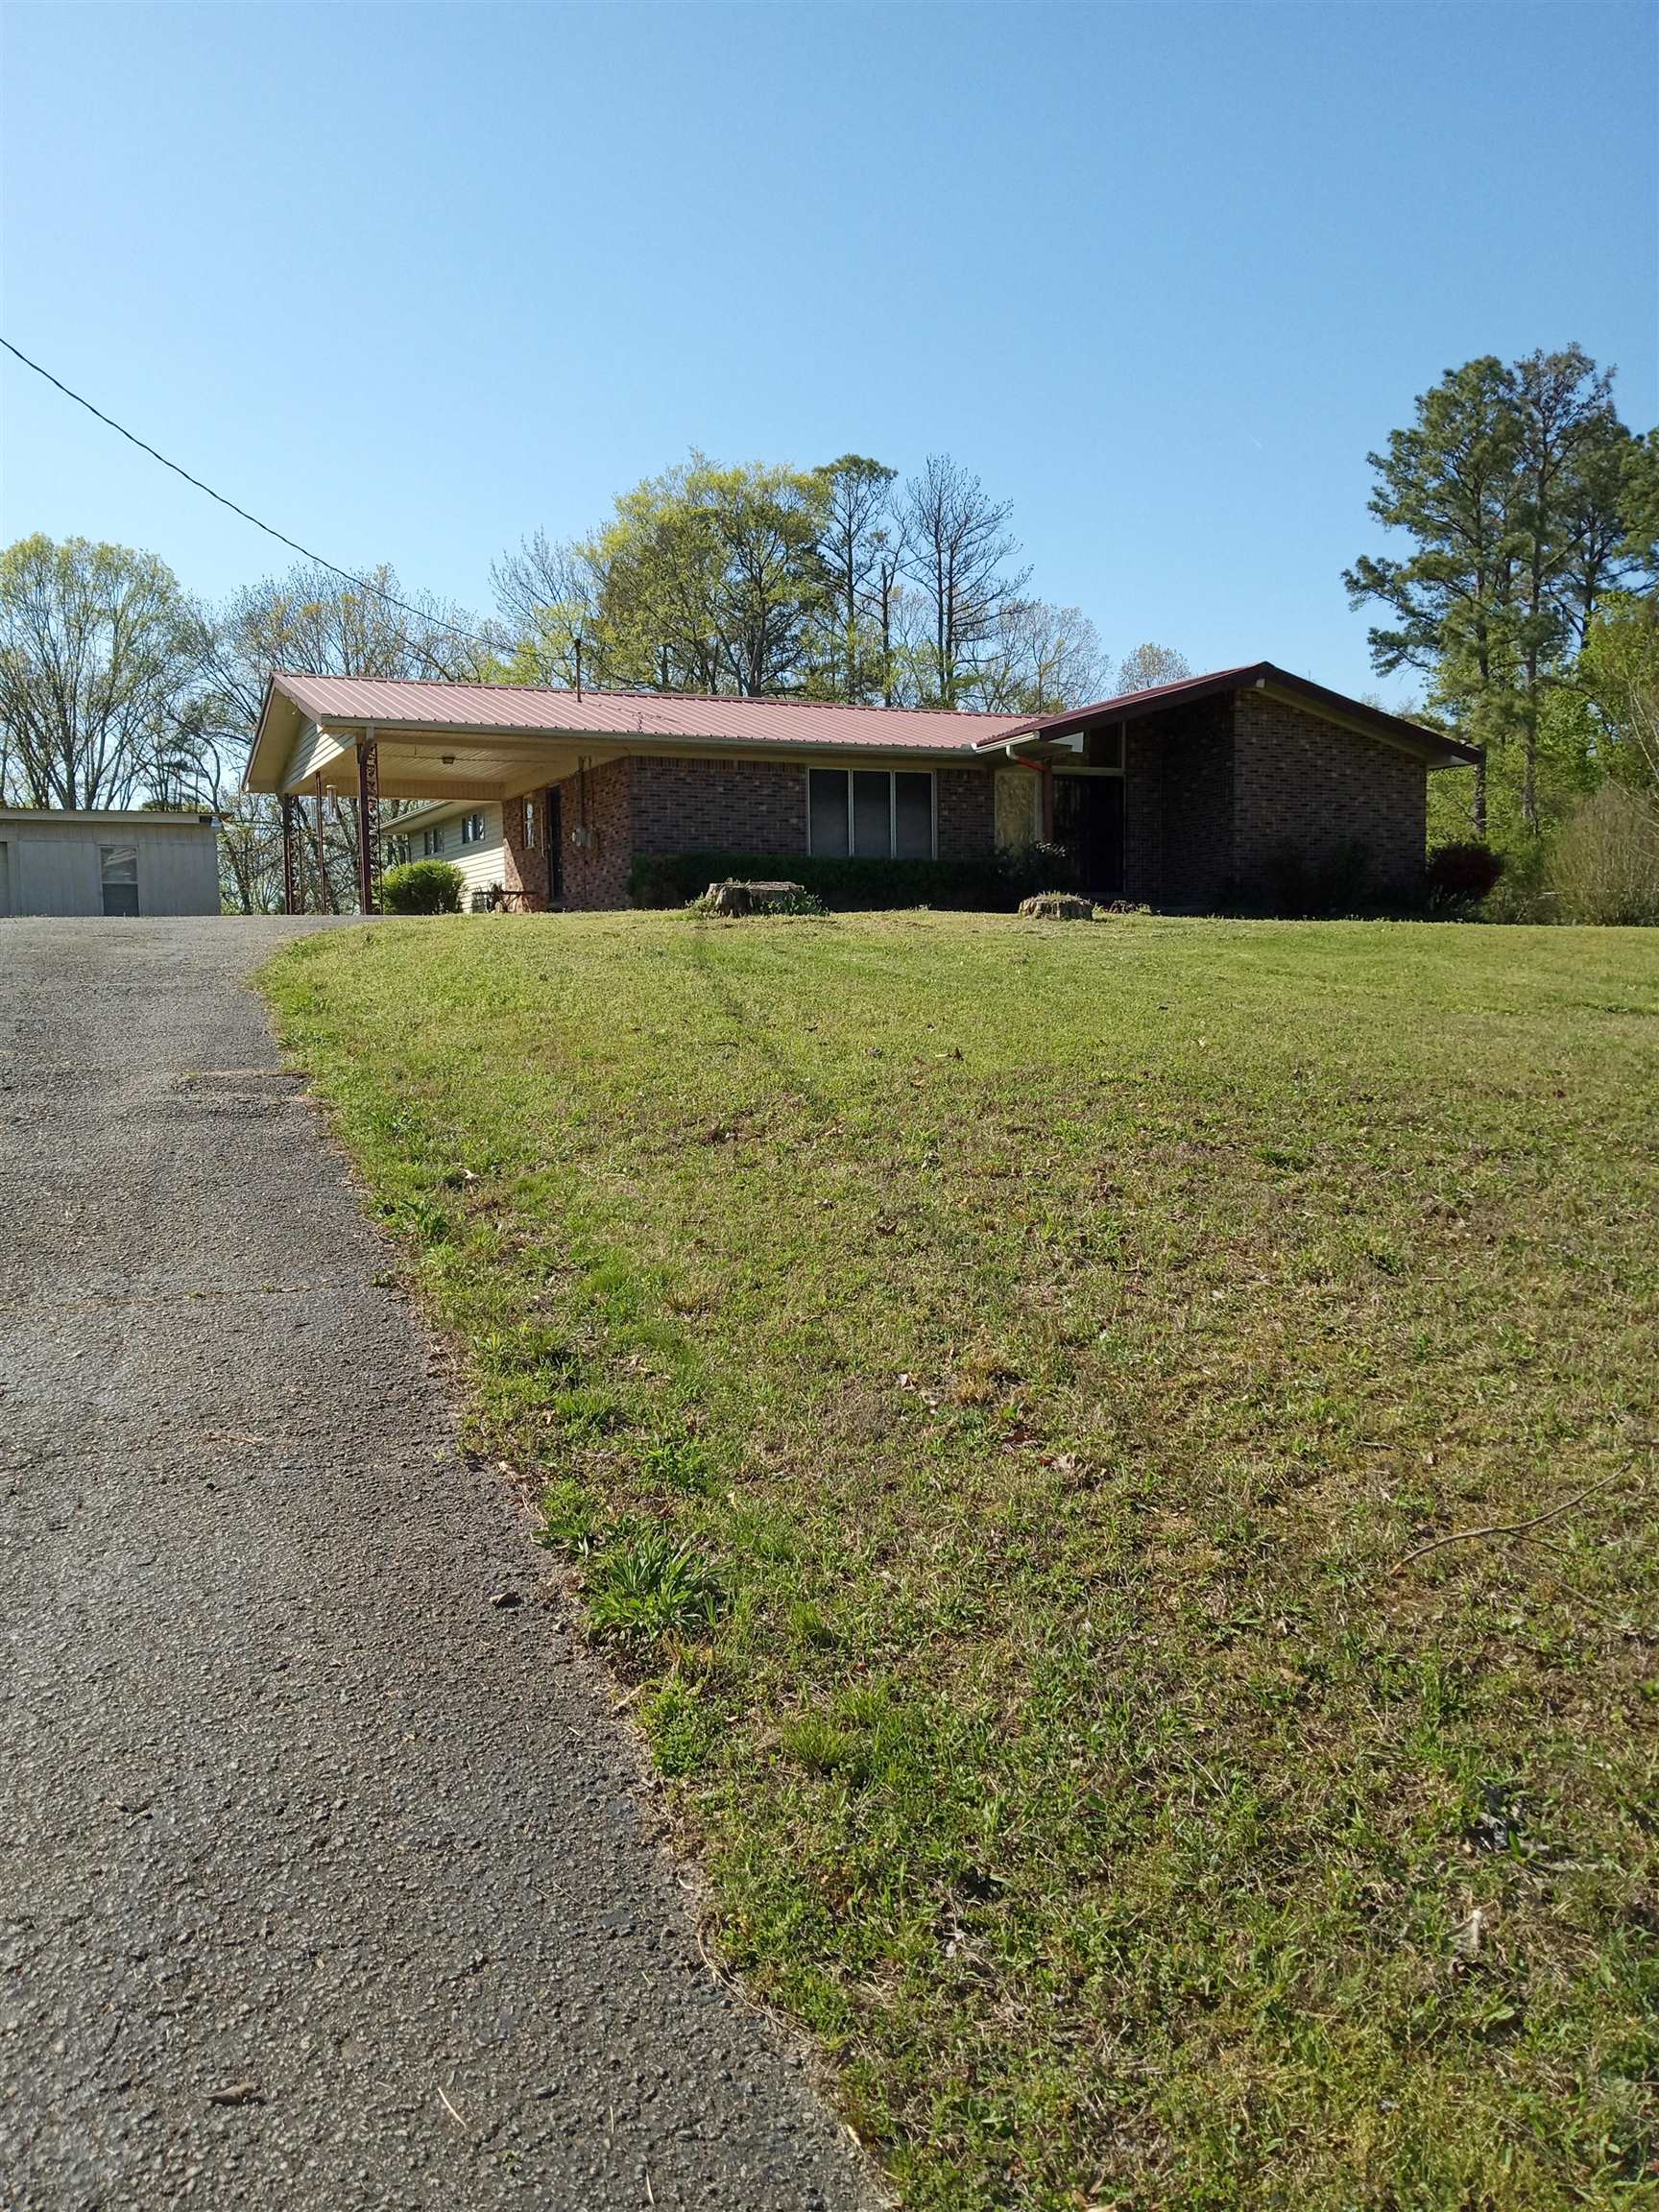 2122 Old Decaturville Rd., Parsons, TN 38363